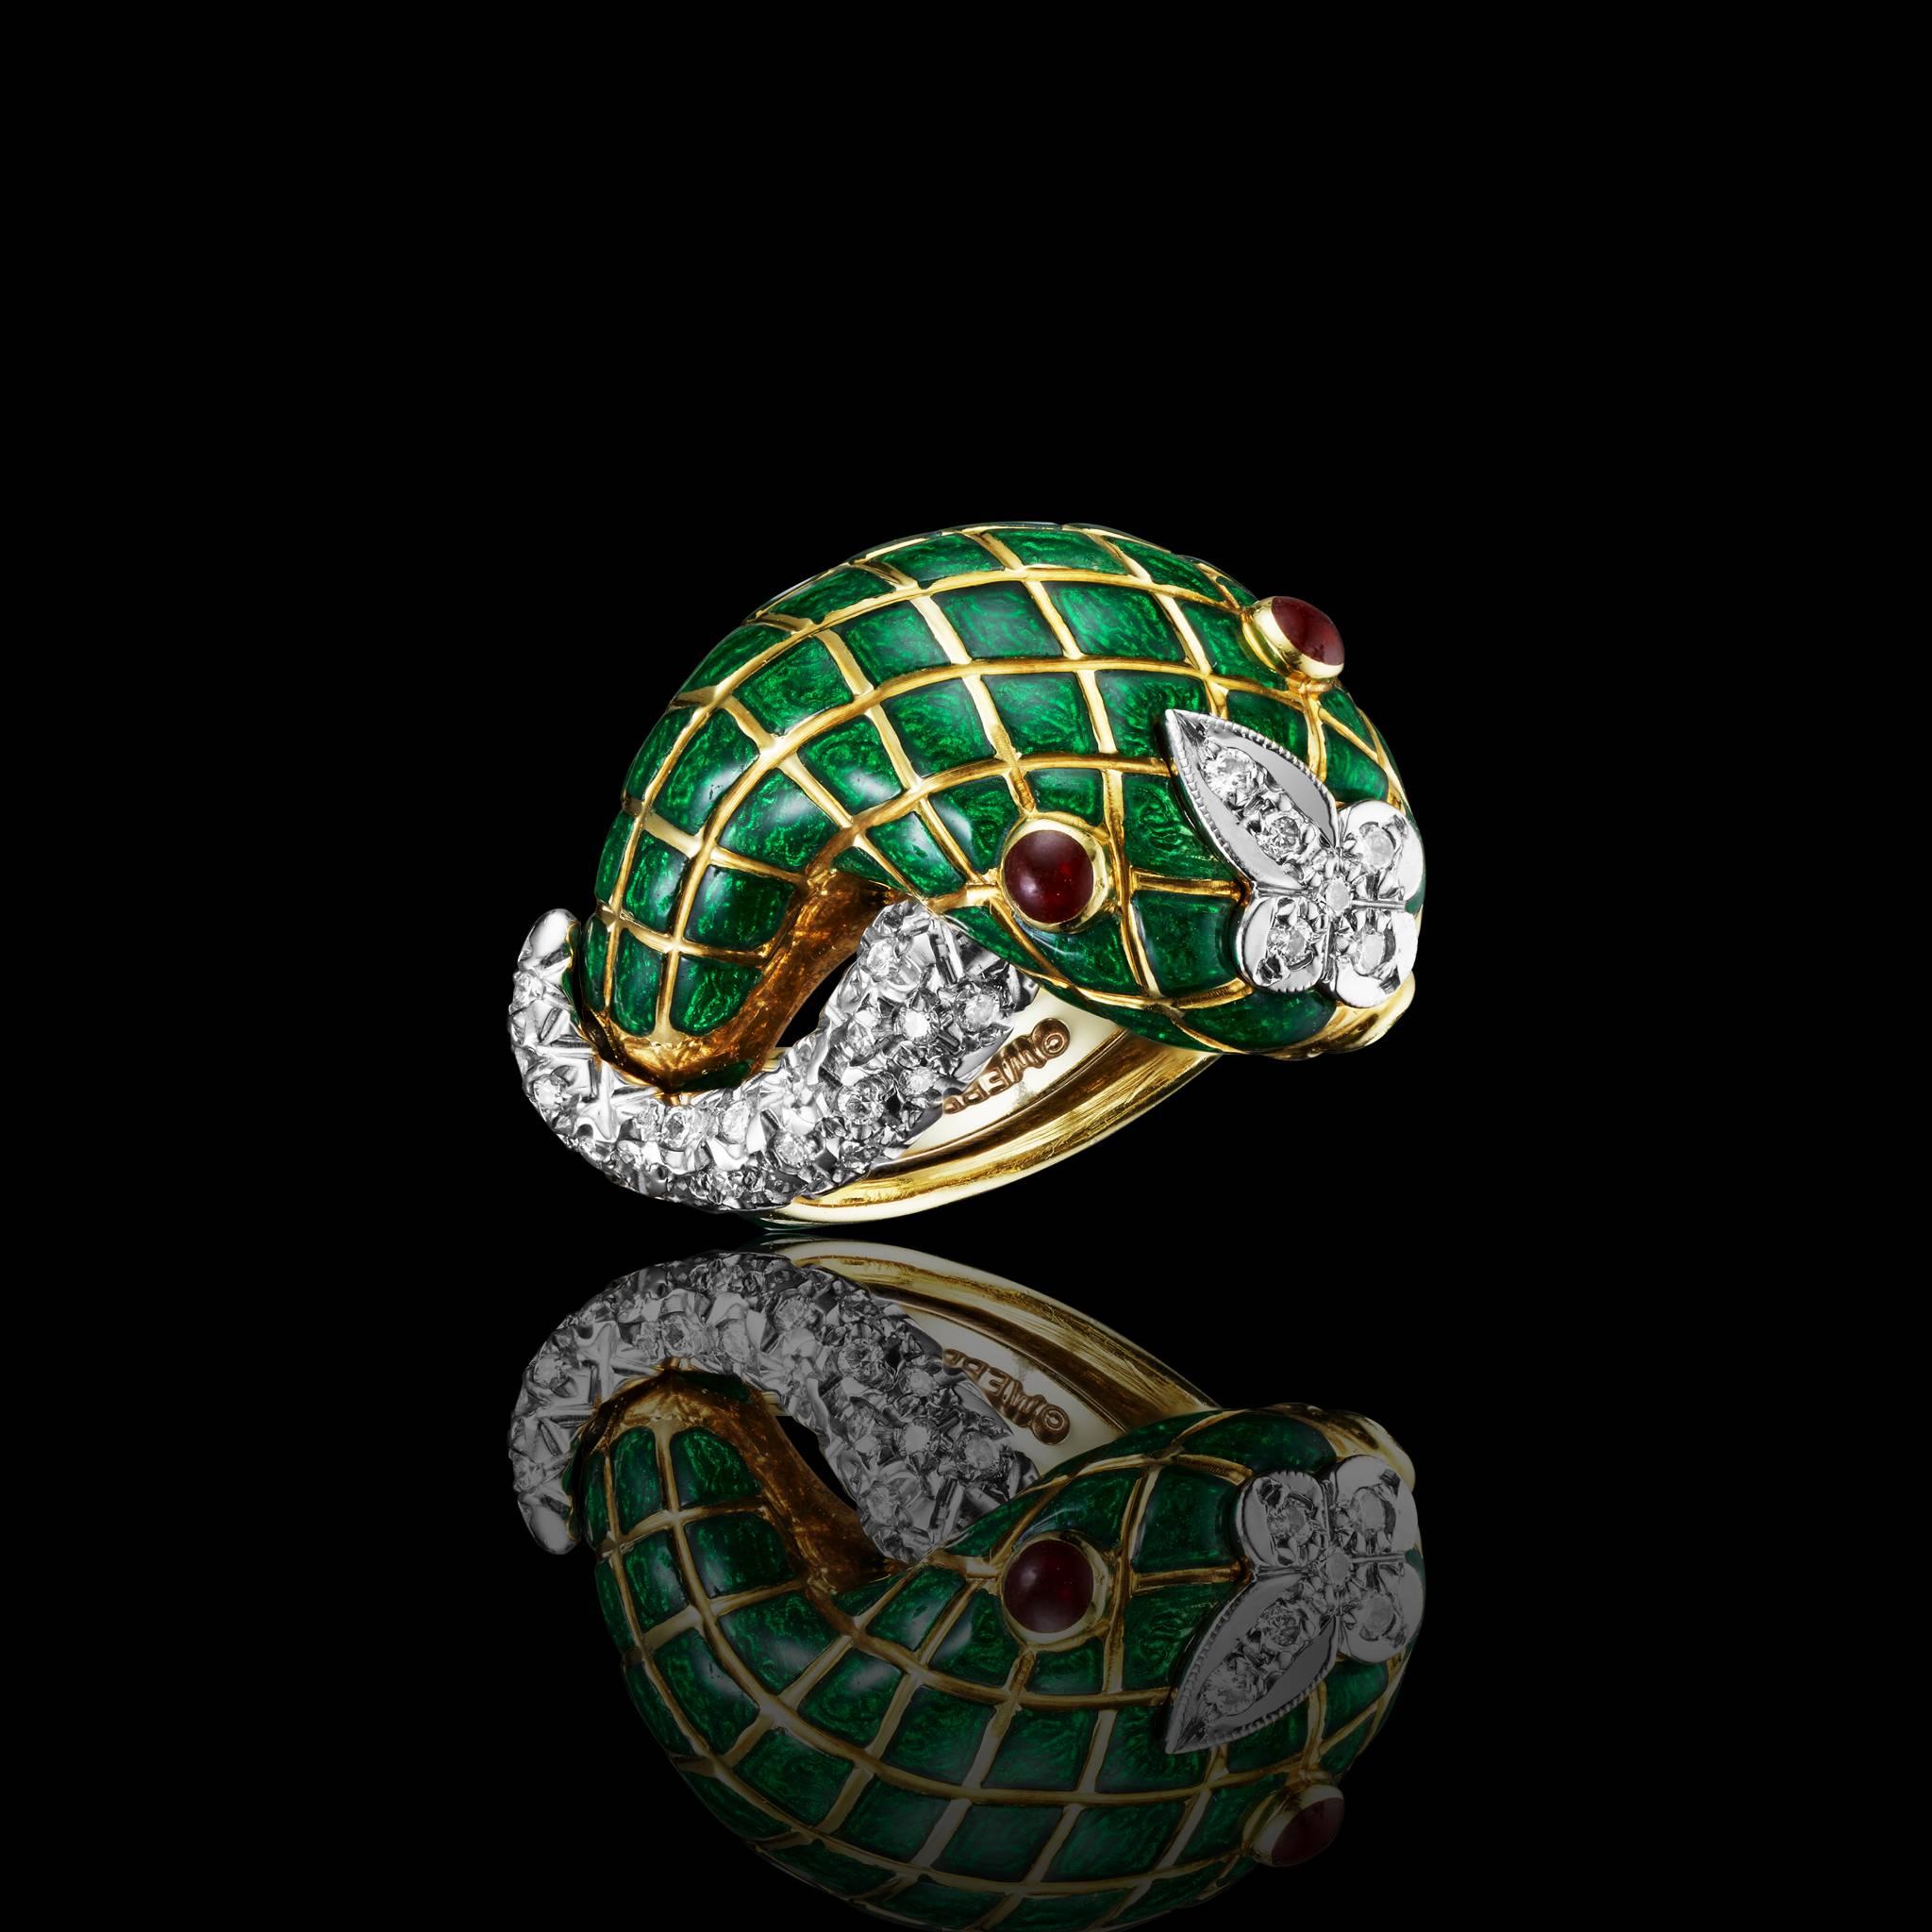 David Webb 18k gold,platinum,diamonds,ruby,and green enamel ring.The green enamel body features the likeness of a rattlesnake.The tell and the nose are made of high quality brillants' cut diamonds on platinum  .The eyes are made of 2 ruby.
-Round